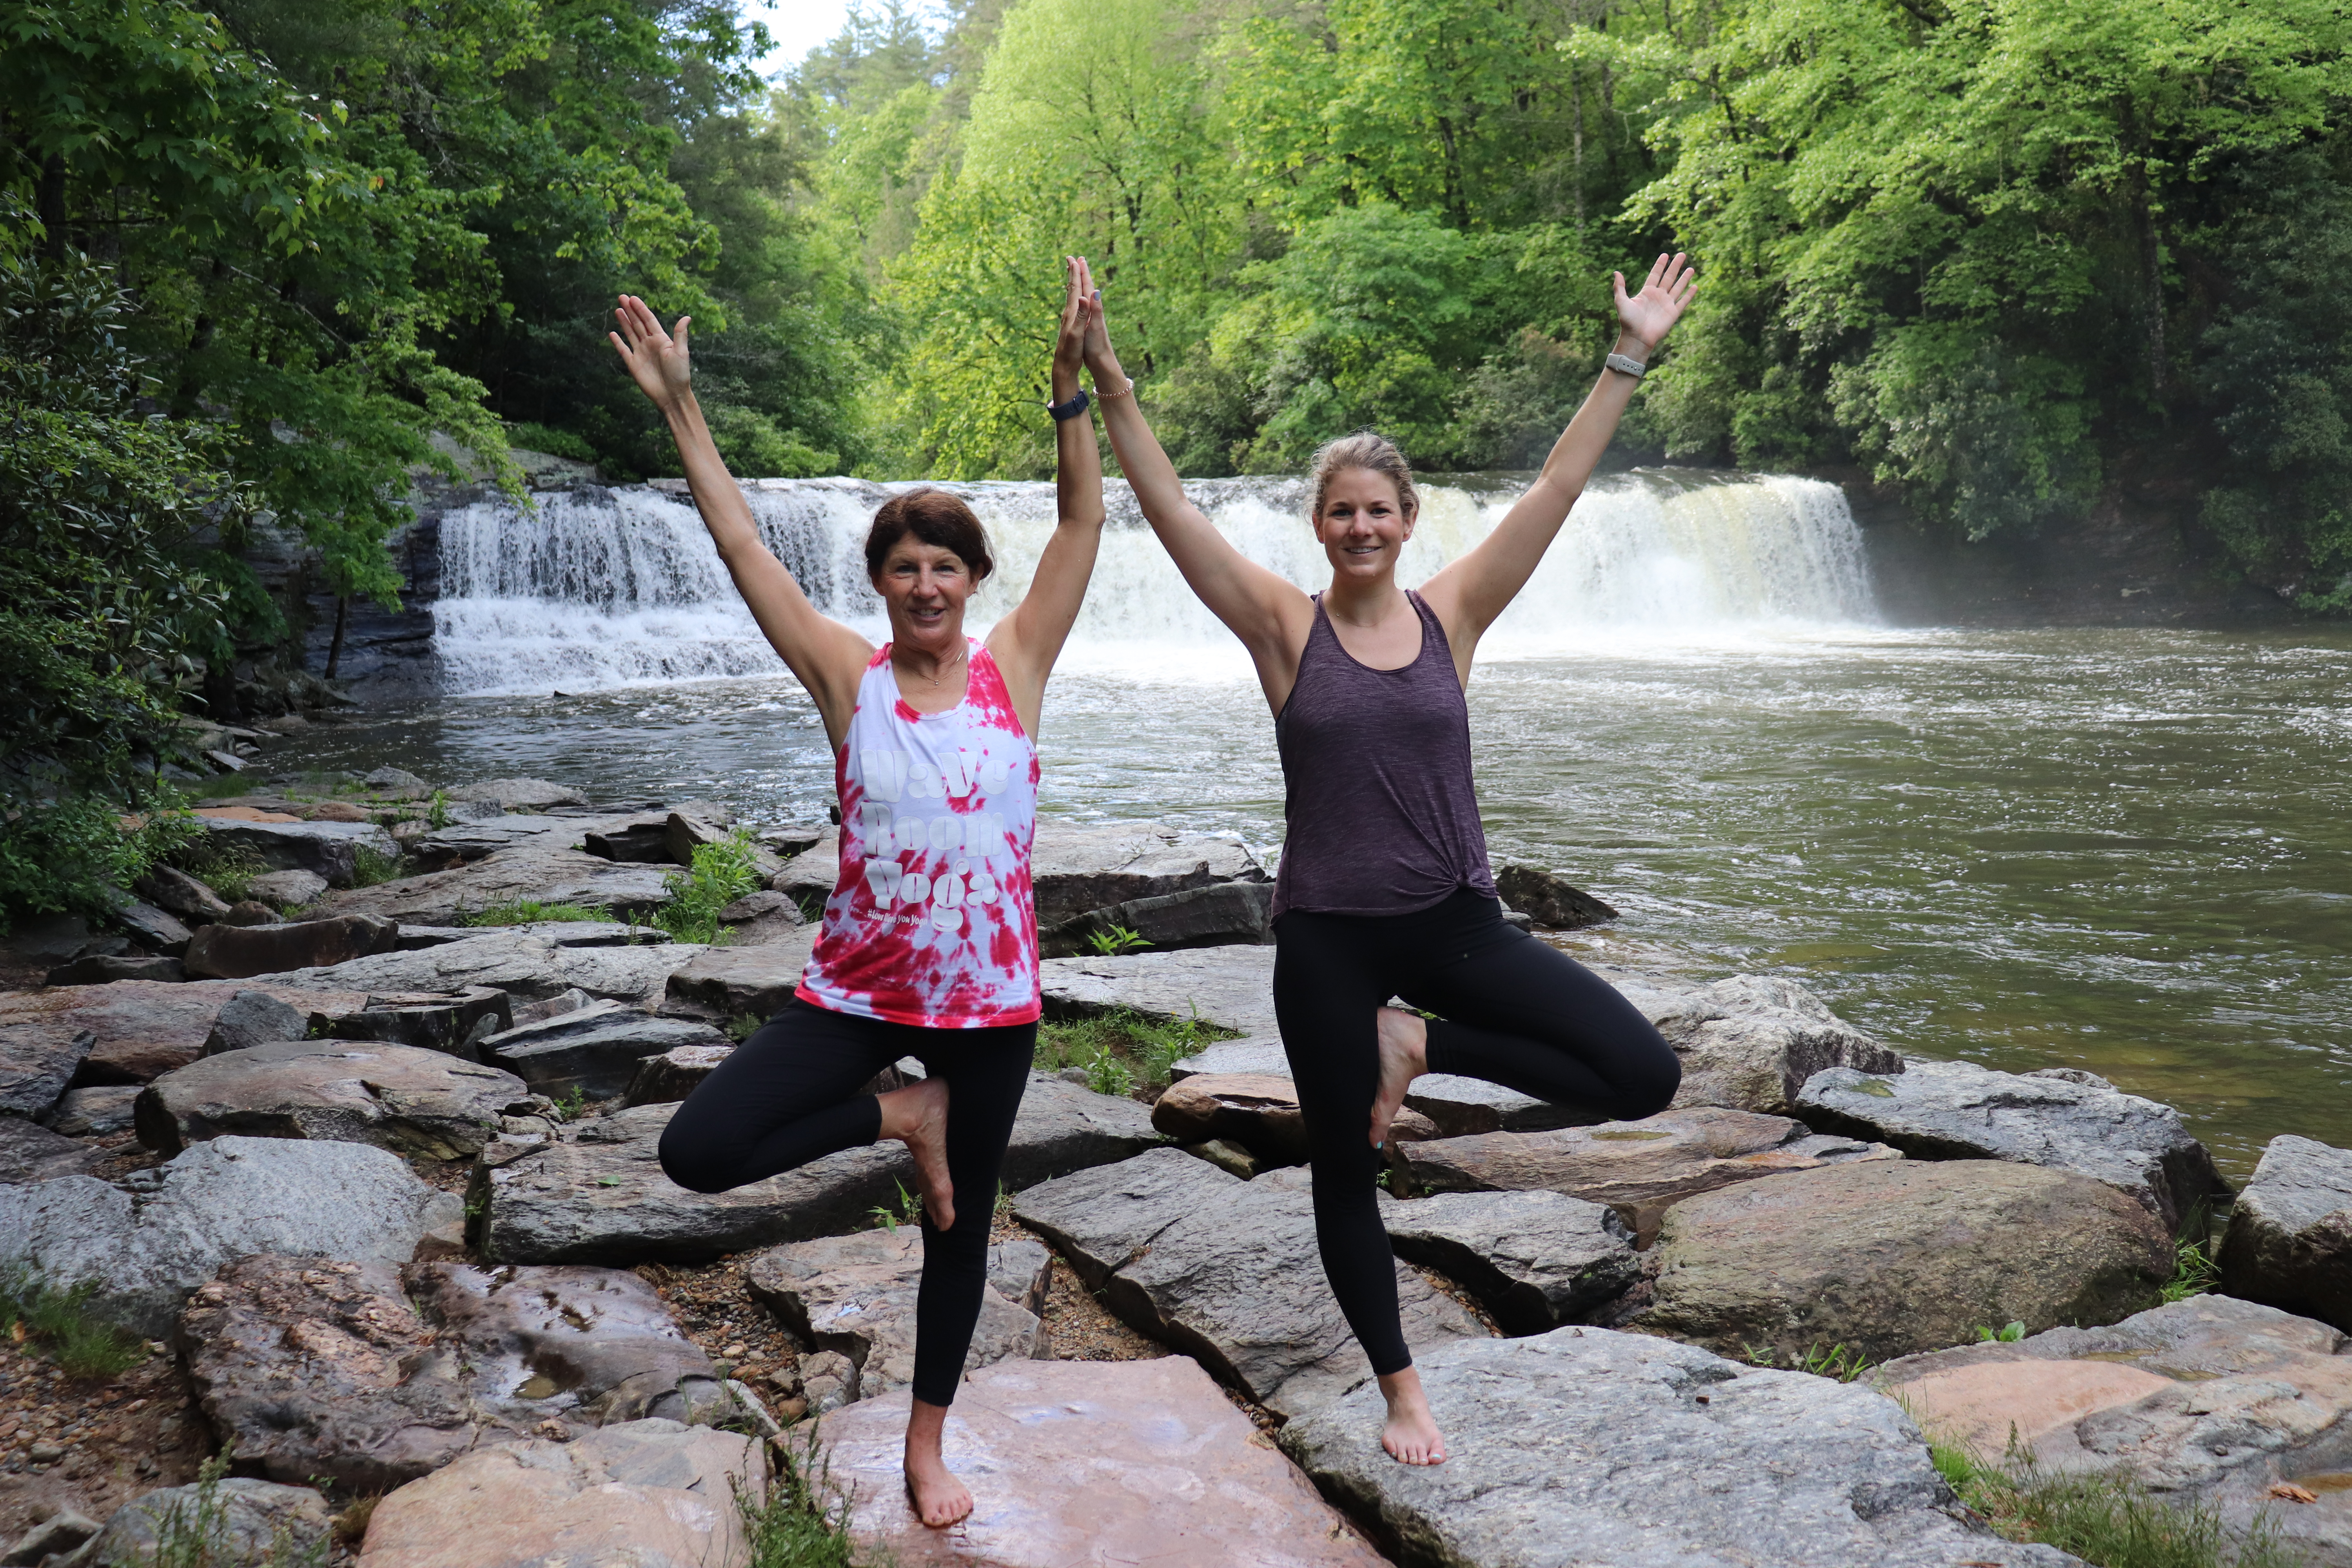 Go for a yoga waterfall hike with Namaste in Nature in Asheville, NC